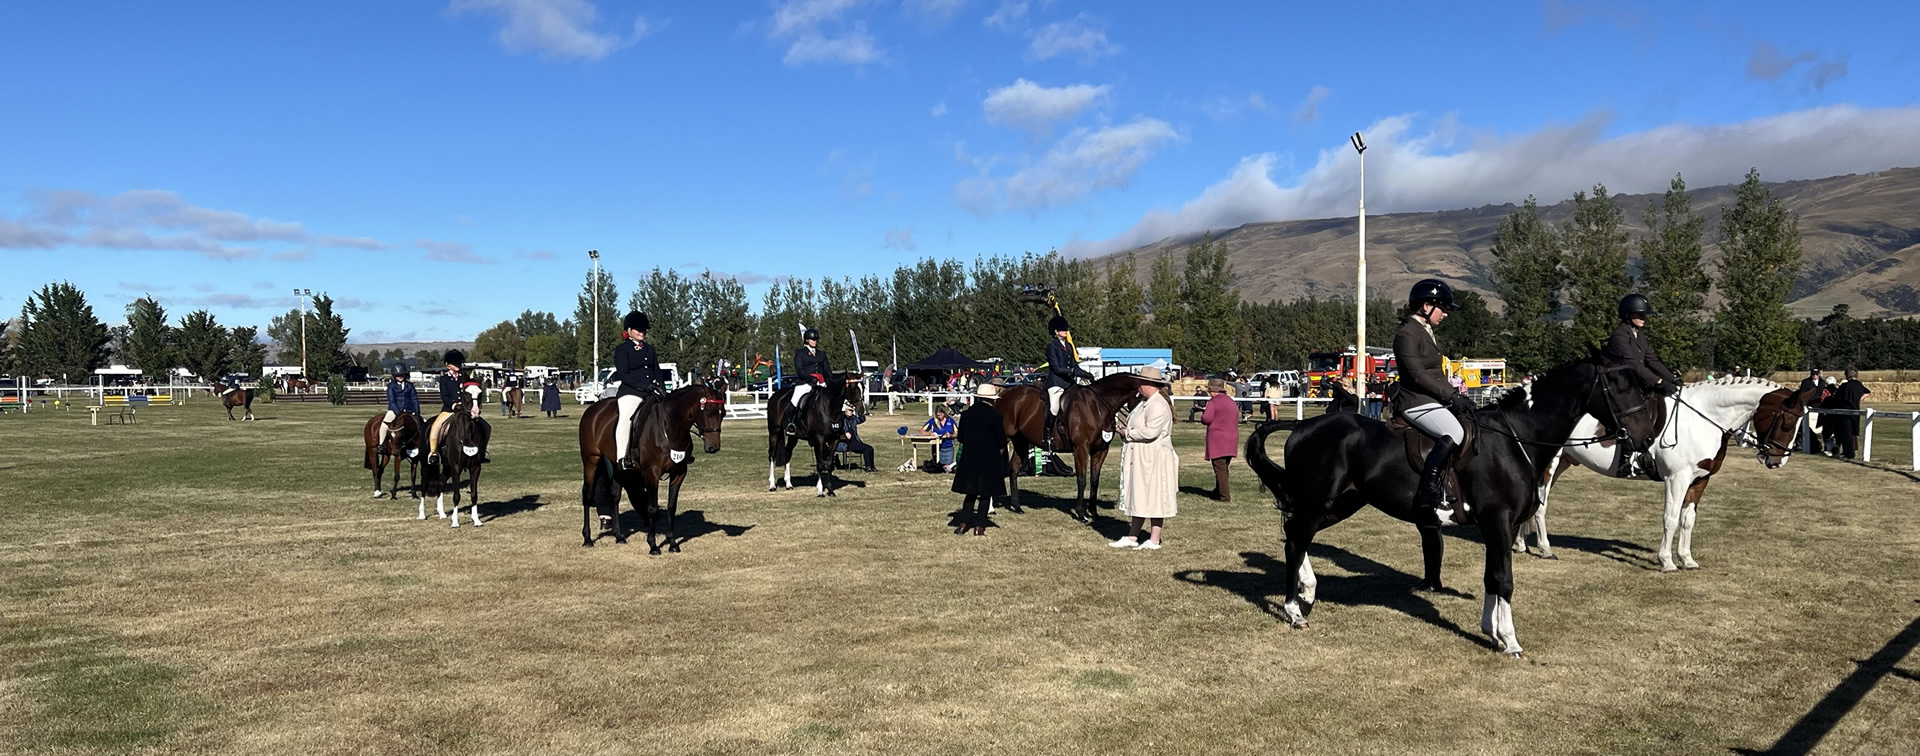 Photo of an open field full of show horses with riders and judges at an agricultural show.